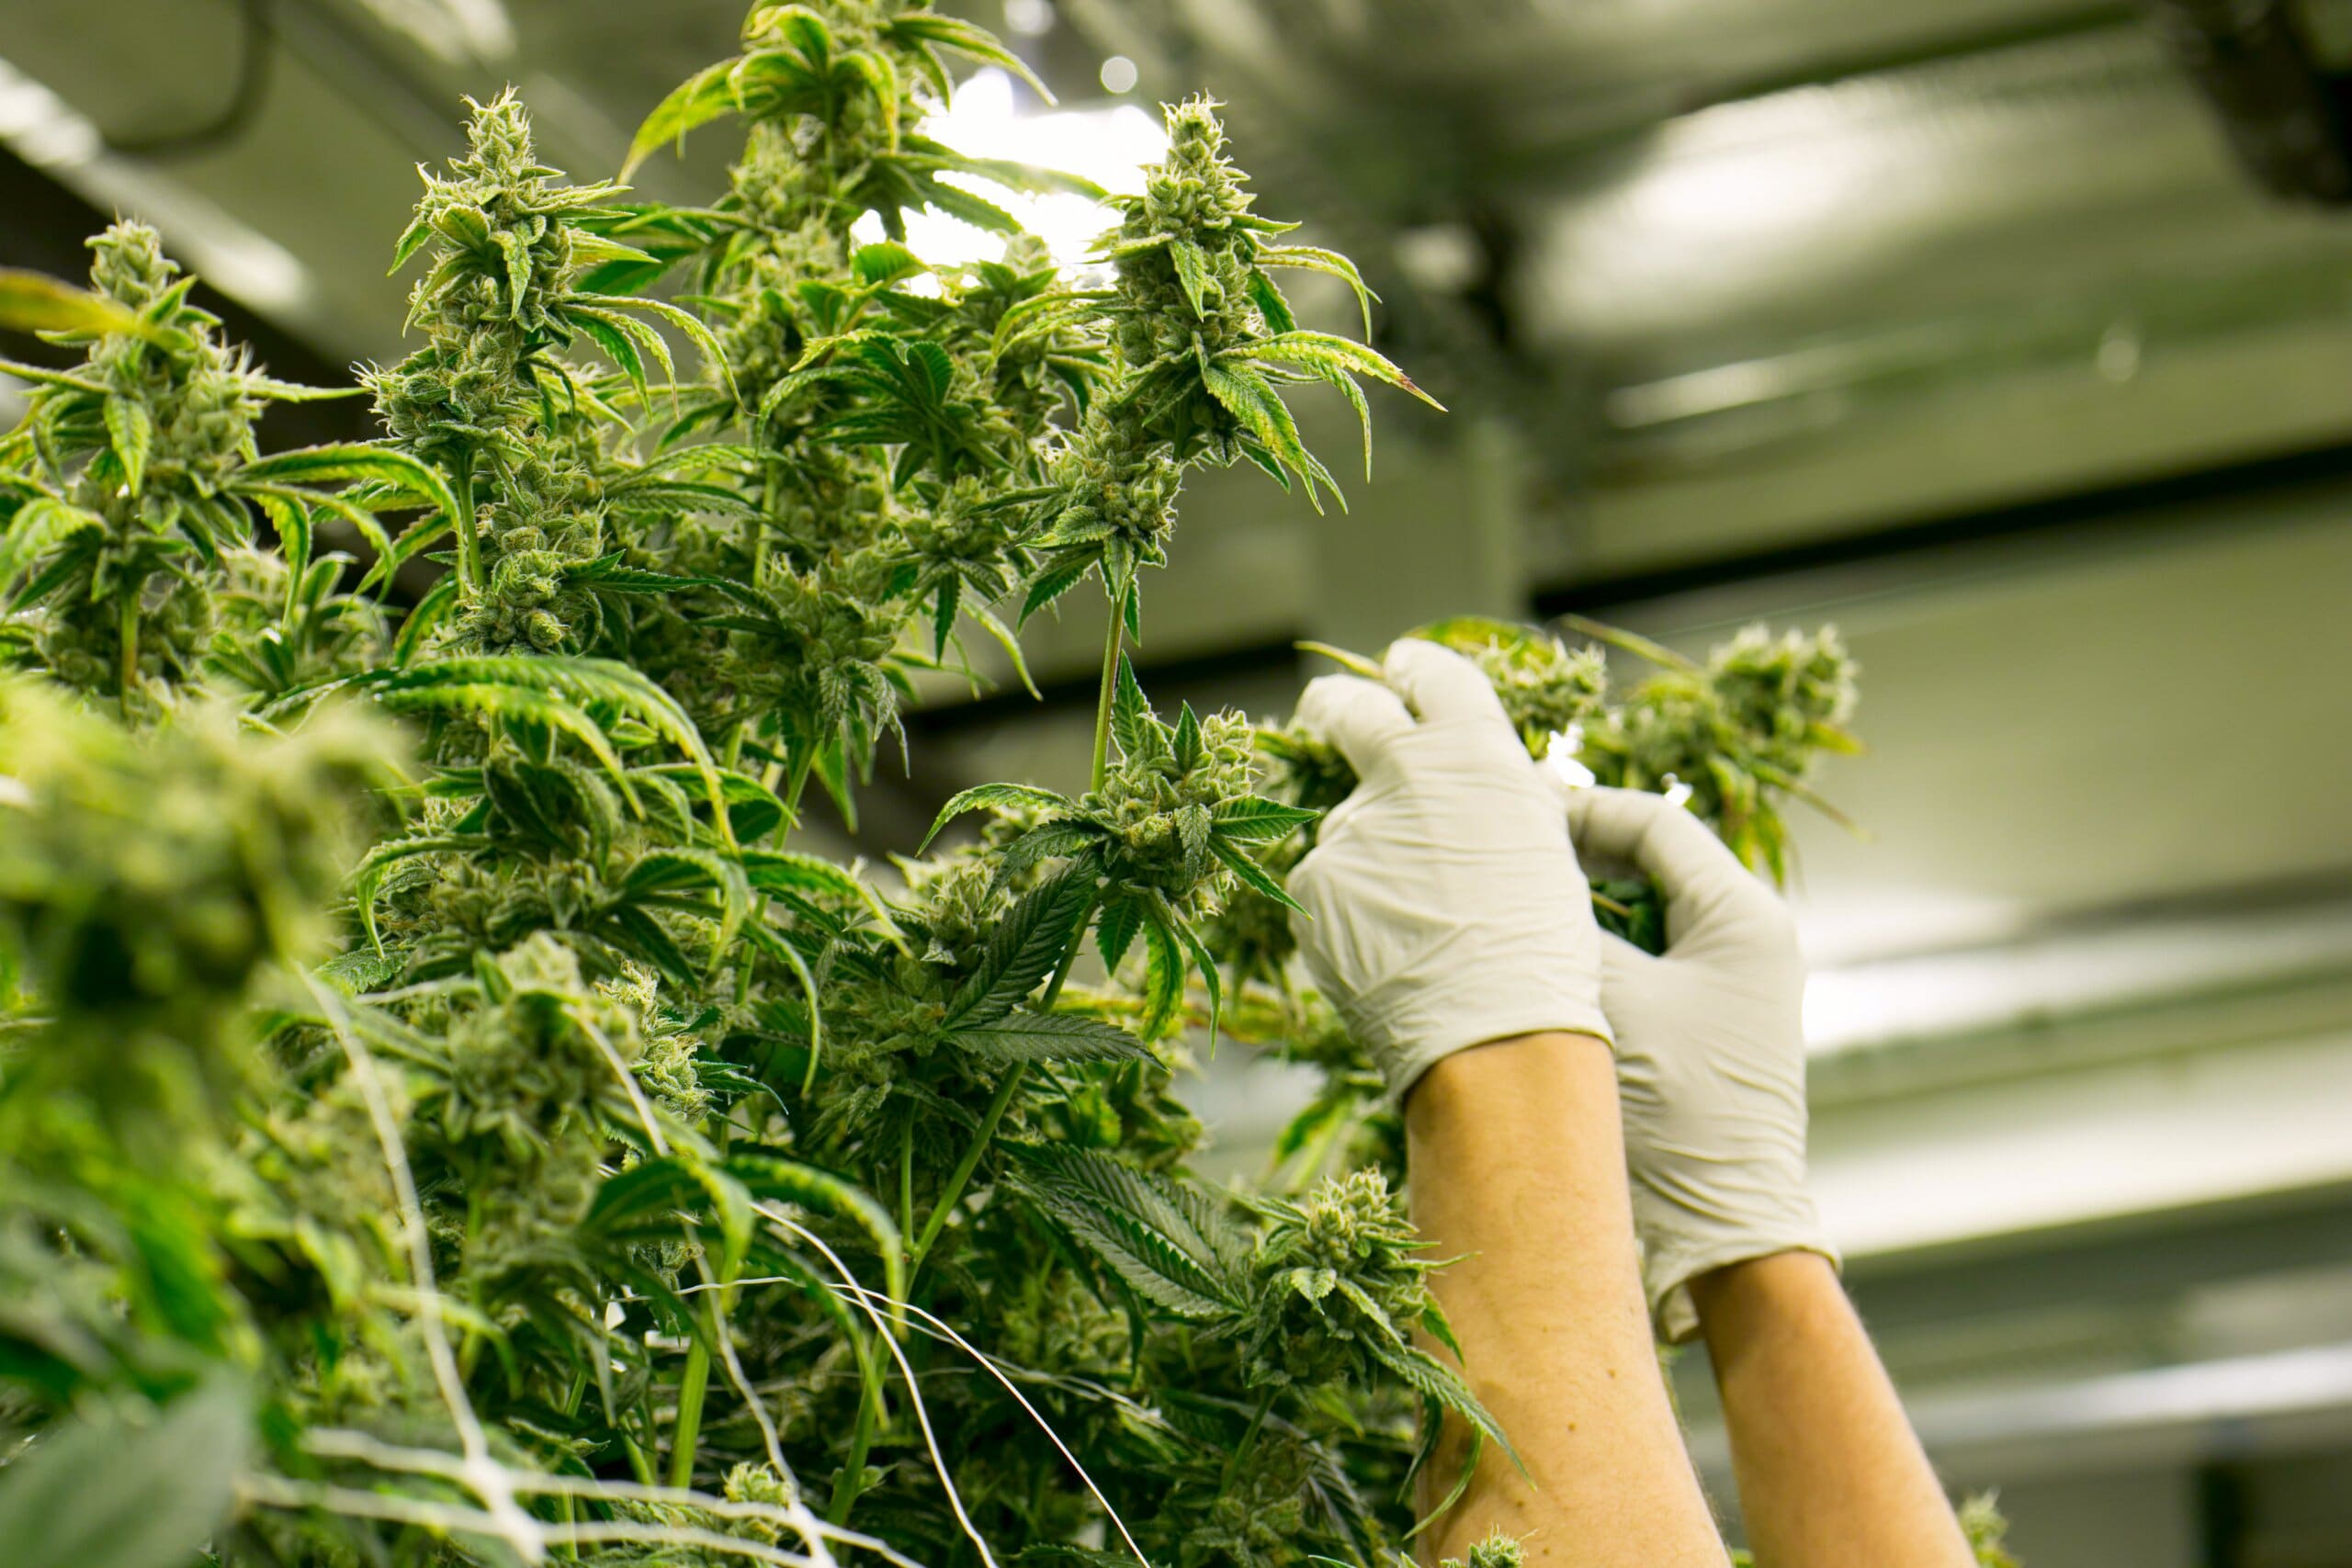 Gloved hands reaching up to trim large cannabis plants in a factory.